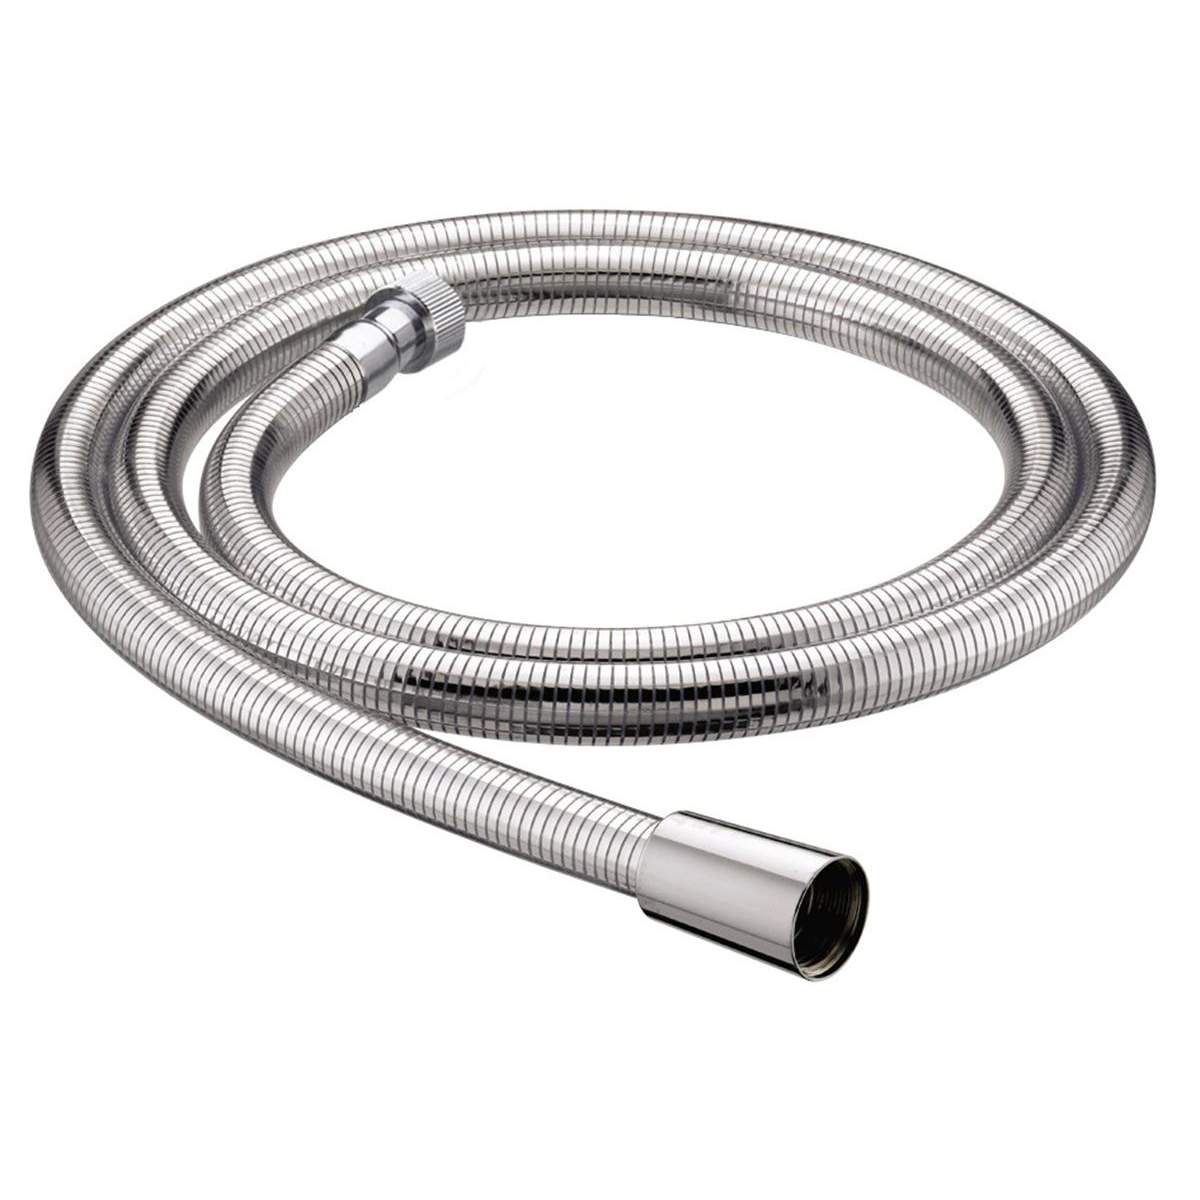 Bristan 1.75m Cone to Nut Easy Clean Shower Hose with 11mm Bore (HOS 175CNE02 C)